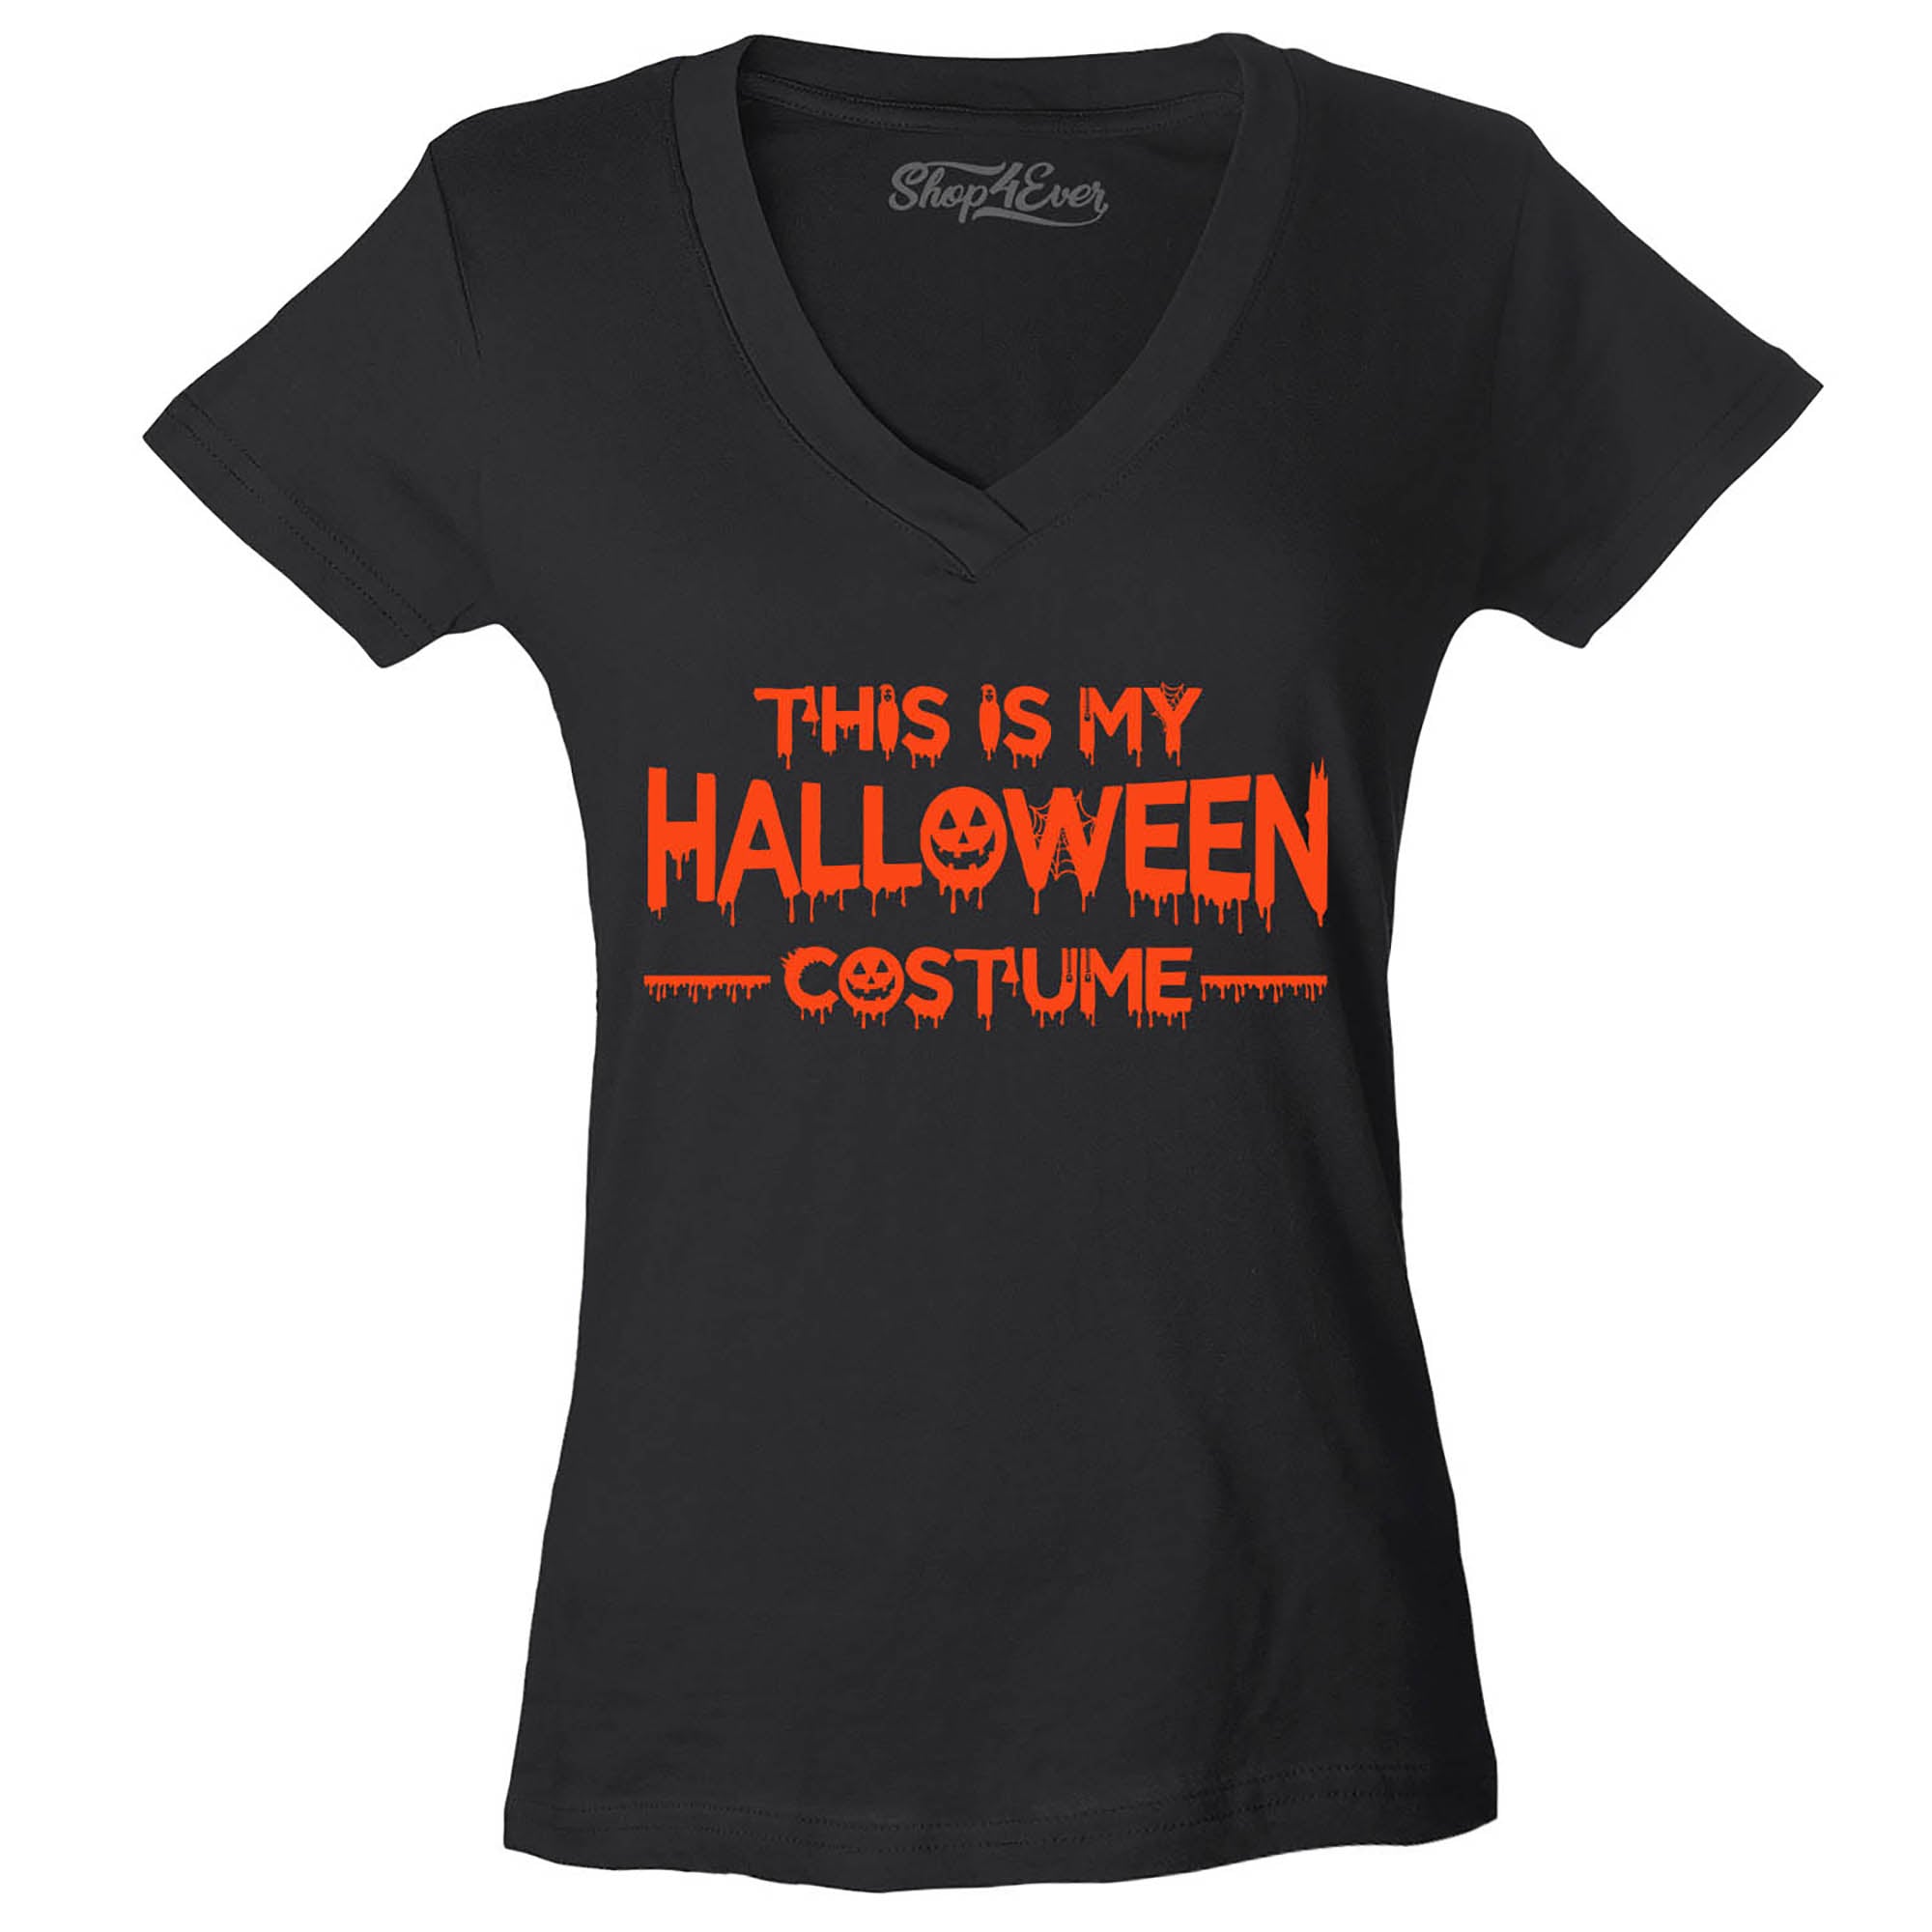 This is My Halloween Costume Women's V-Neck T-Shirt Slim Fit